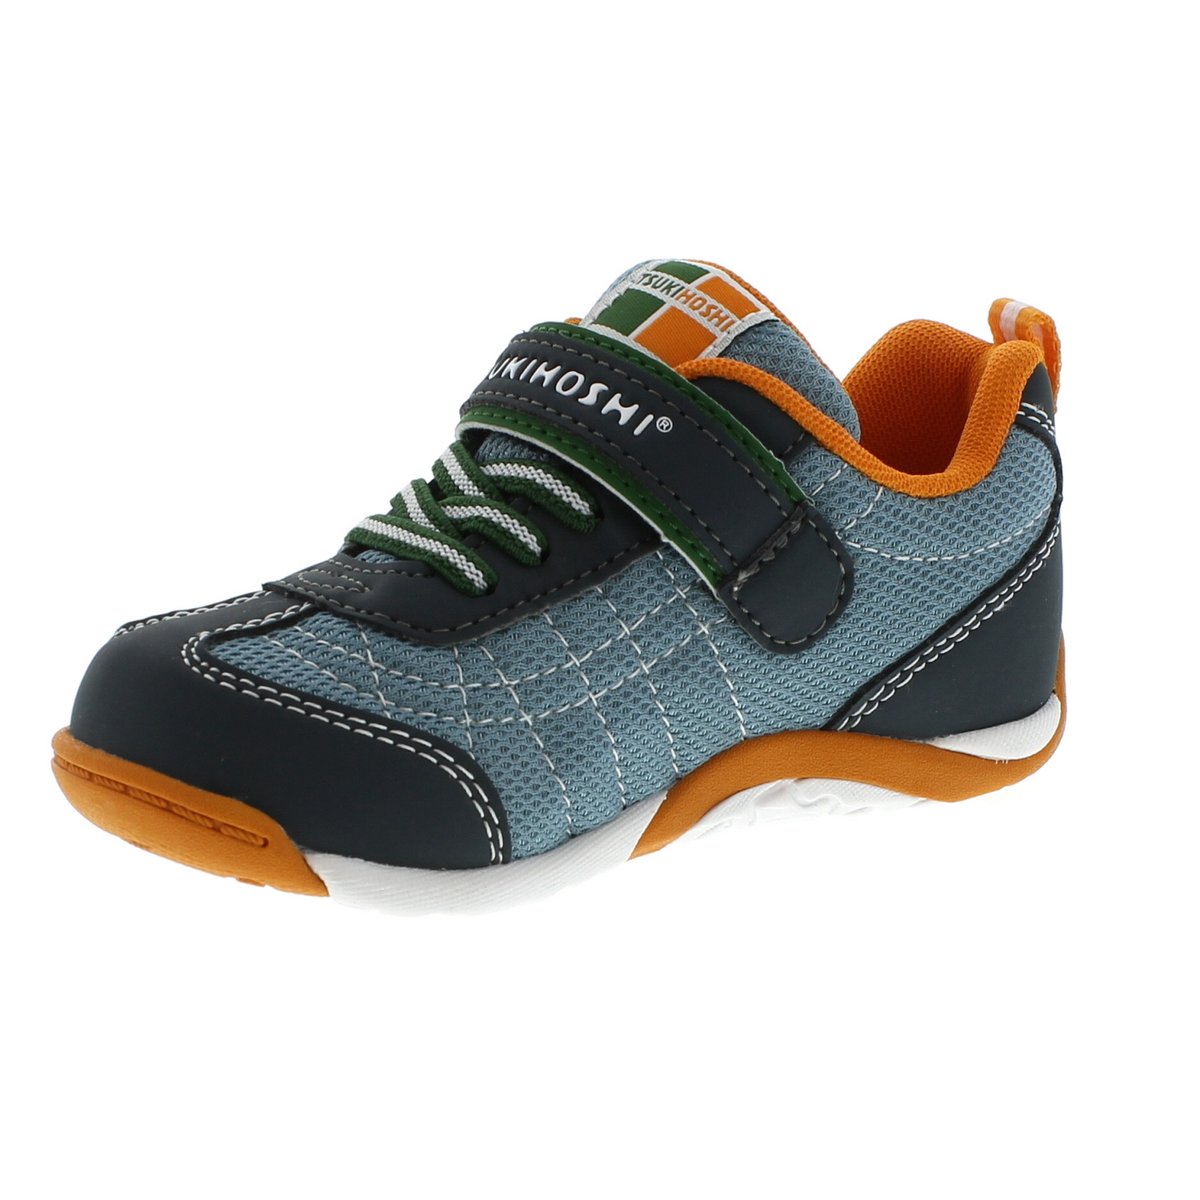 Child Tsukihoshi Kaz Sneaker in Charcoal/Sea from the front view